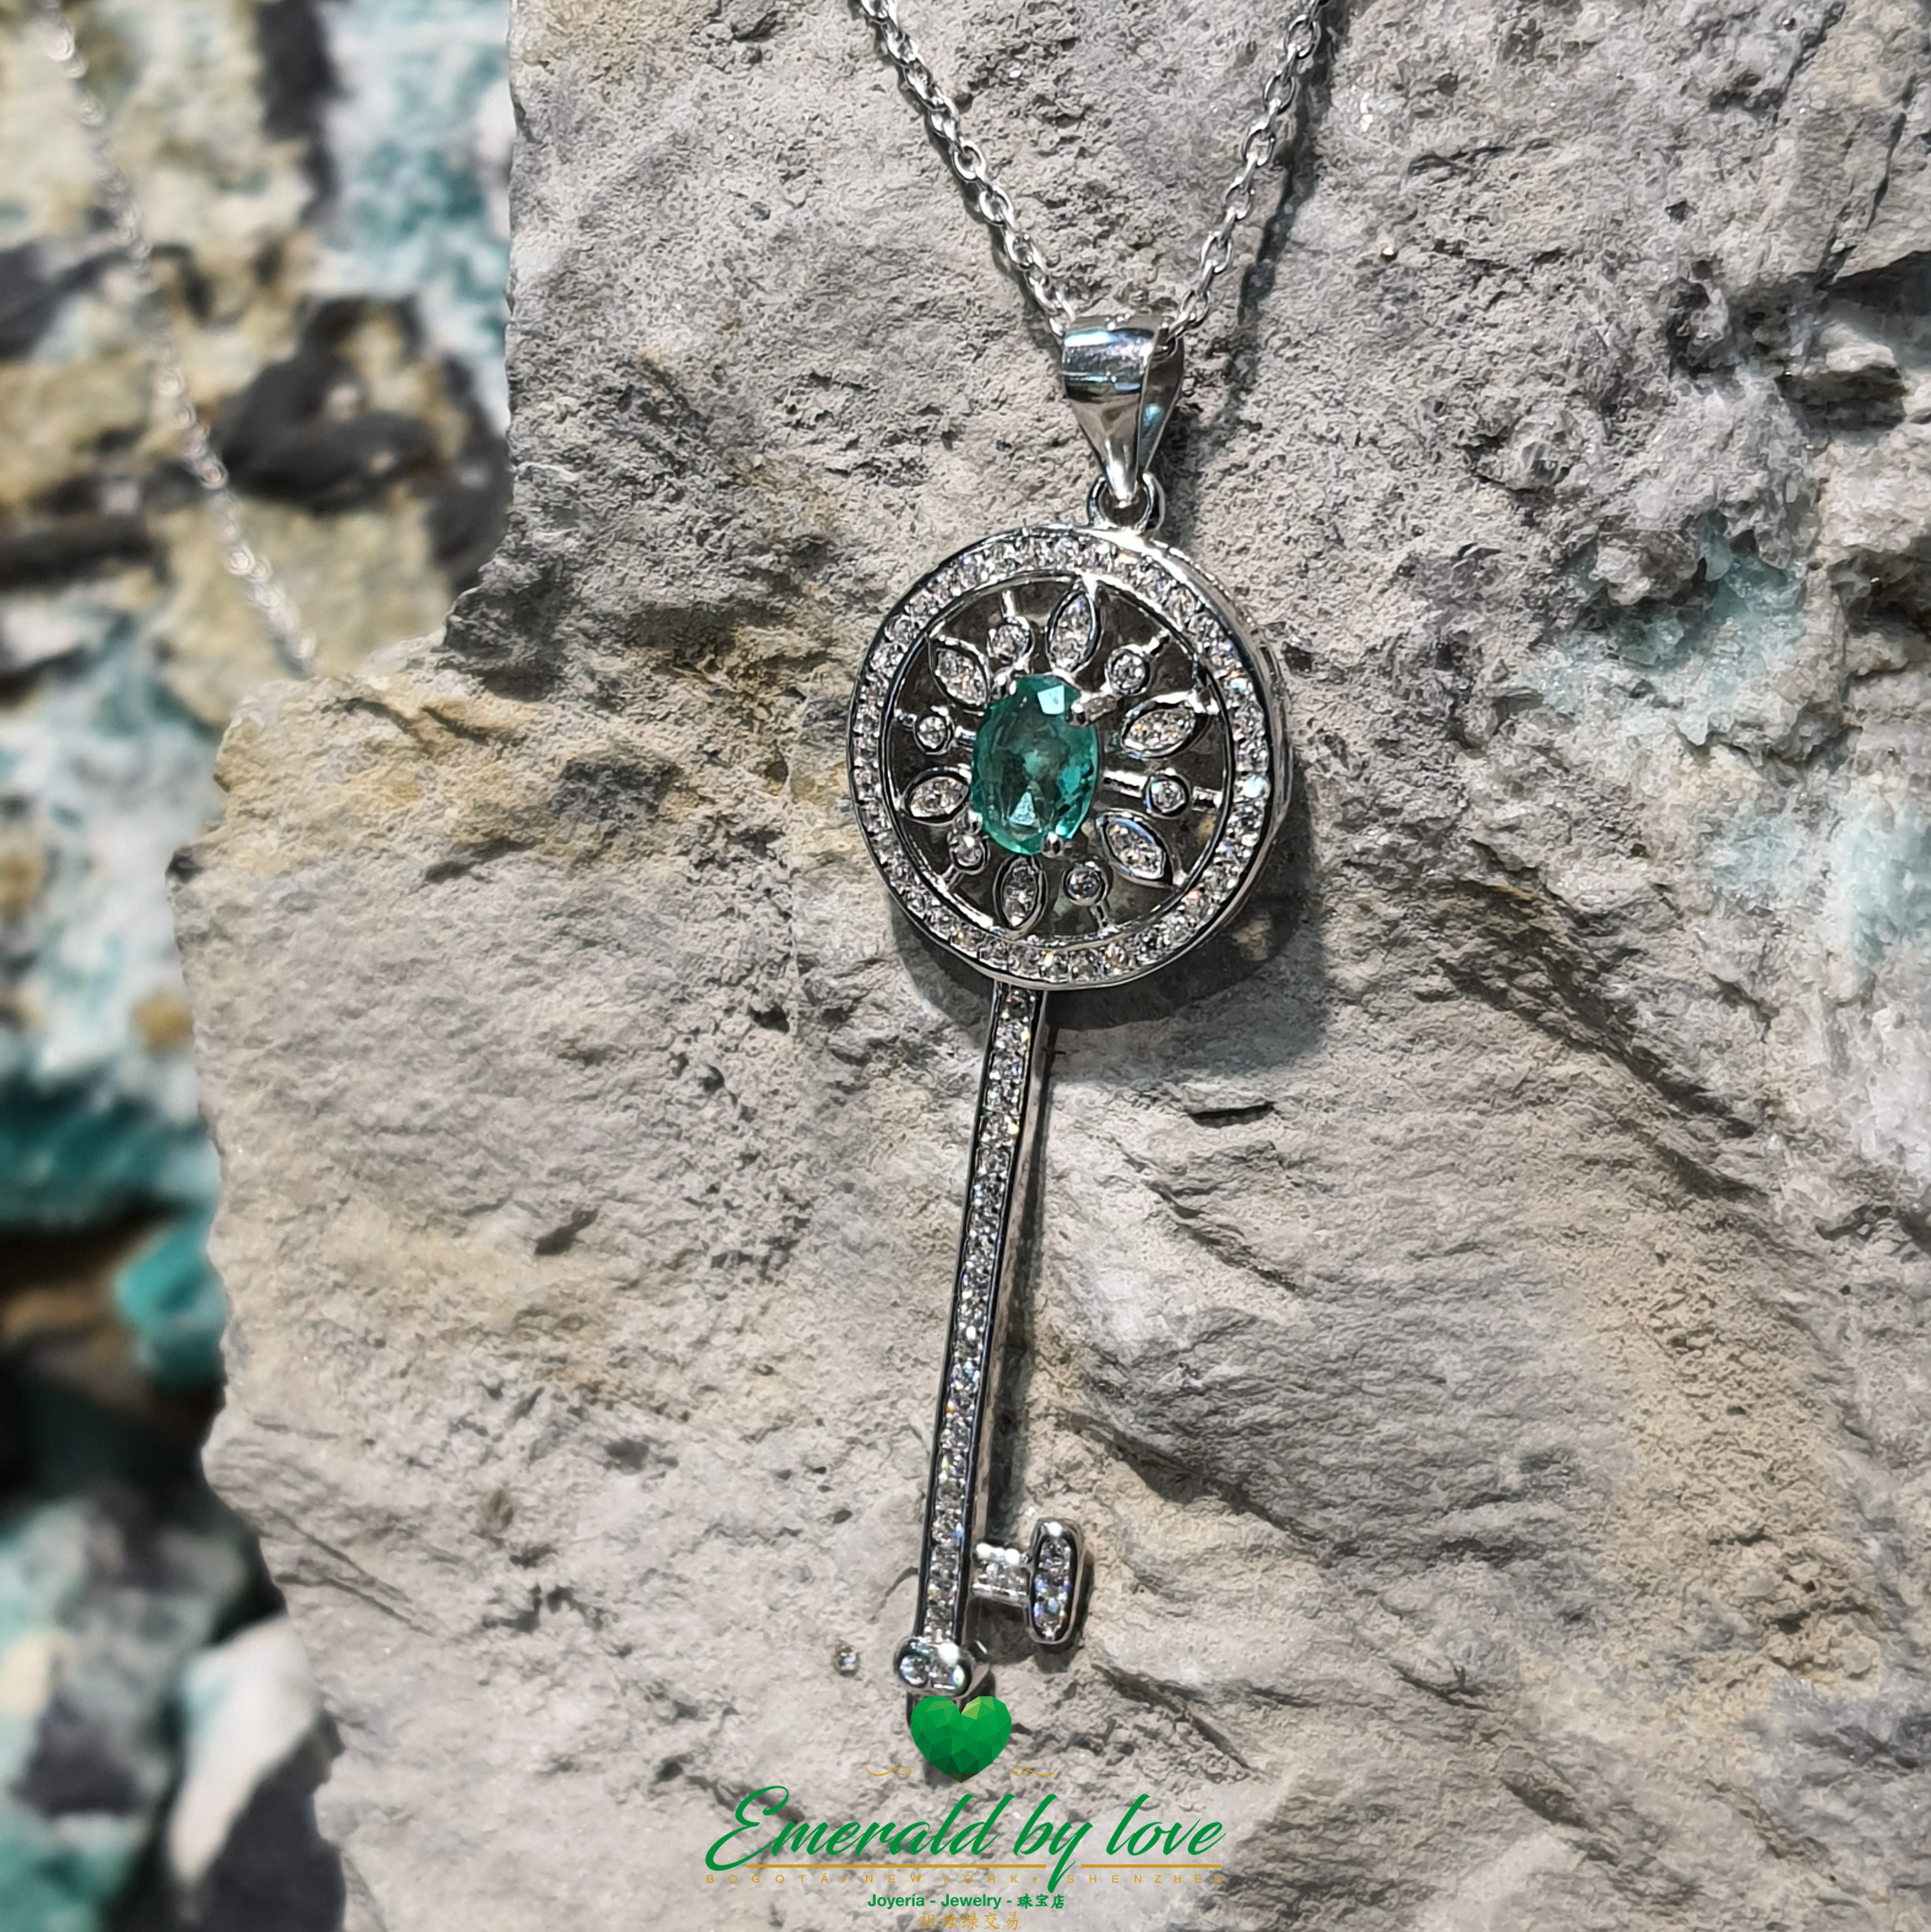 Medium-Sized Key Pendant in Sterling Silver with Oval Central Emerald